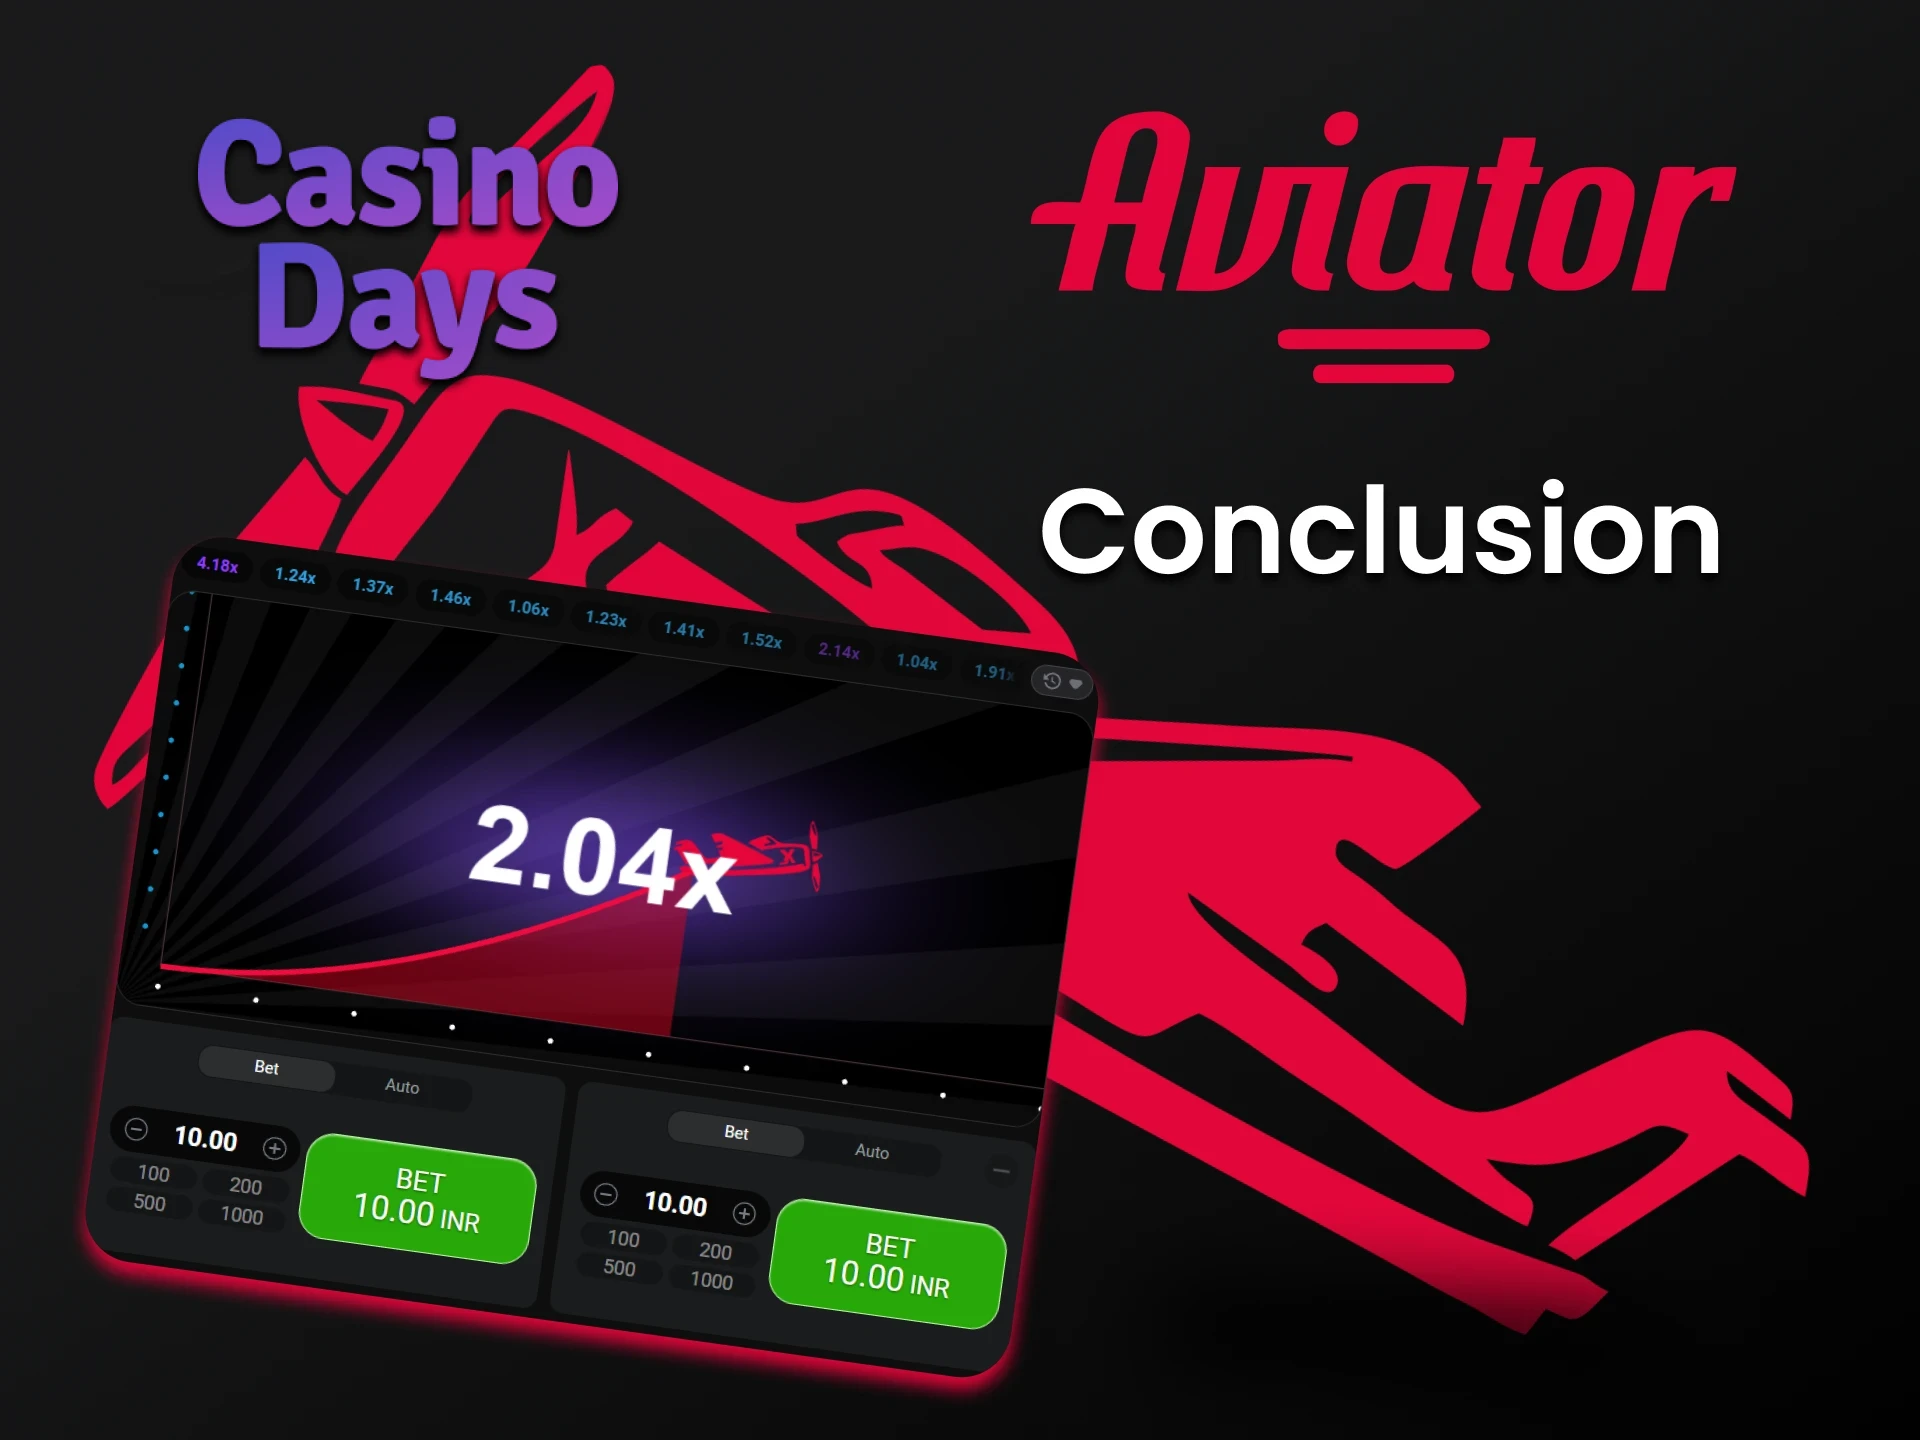 Play Aviator at Casino Days with the correct choice.